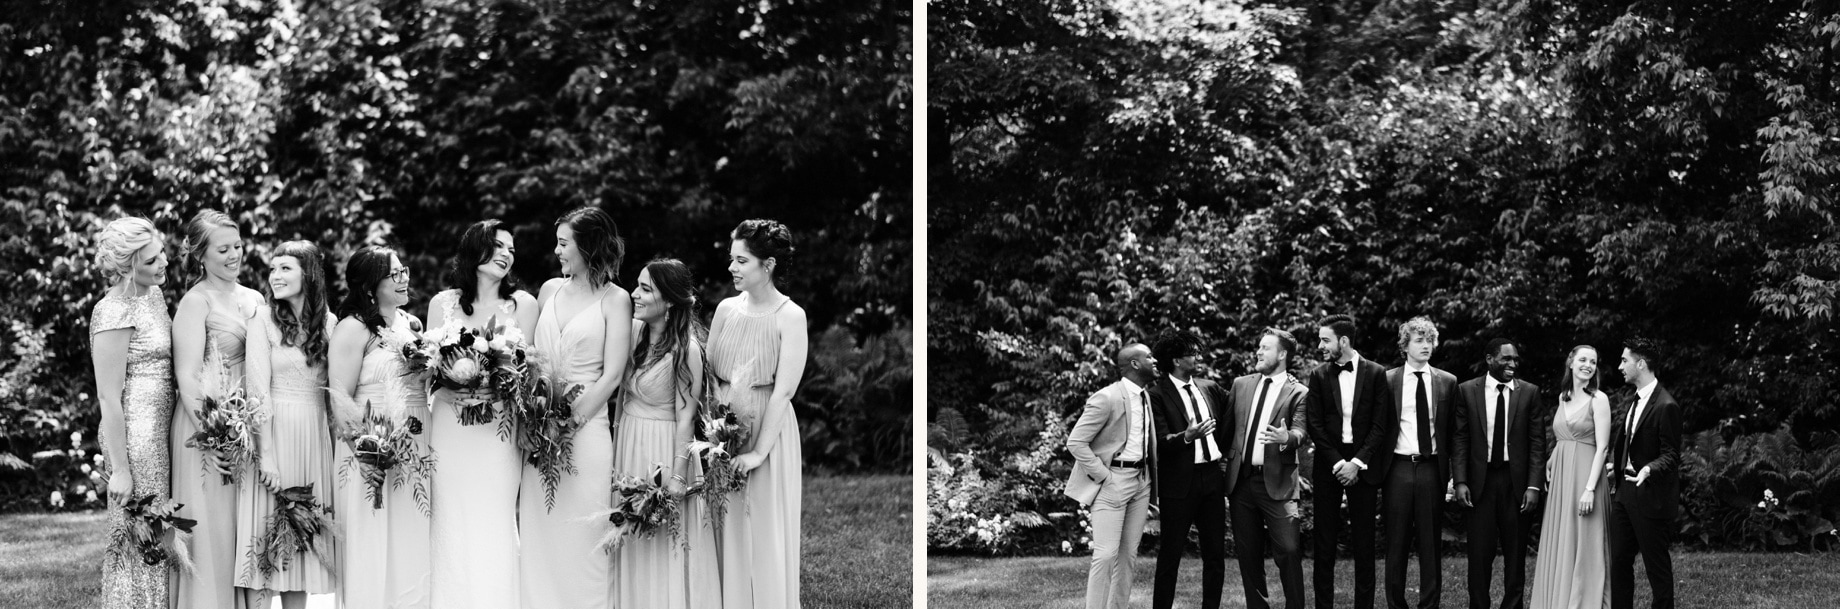 black and white photos of wedding party